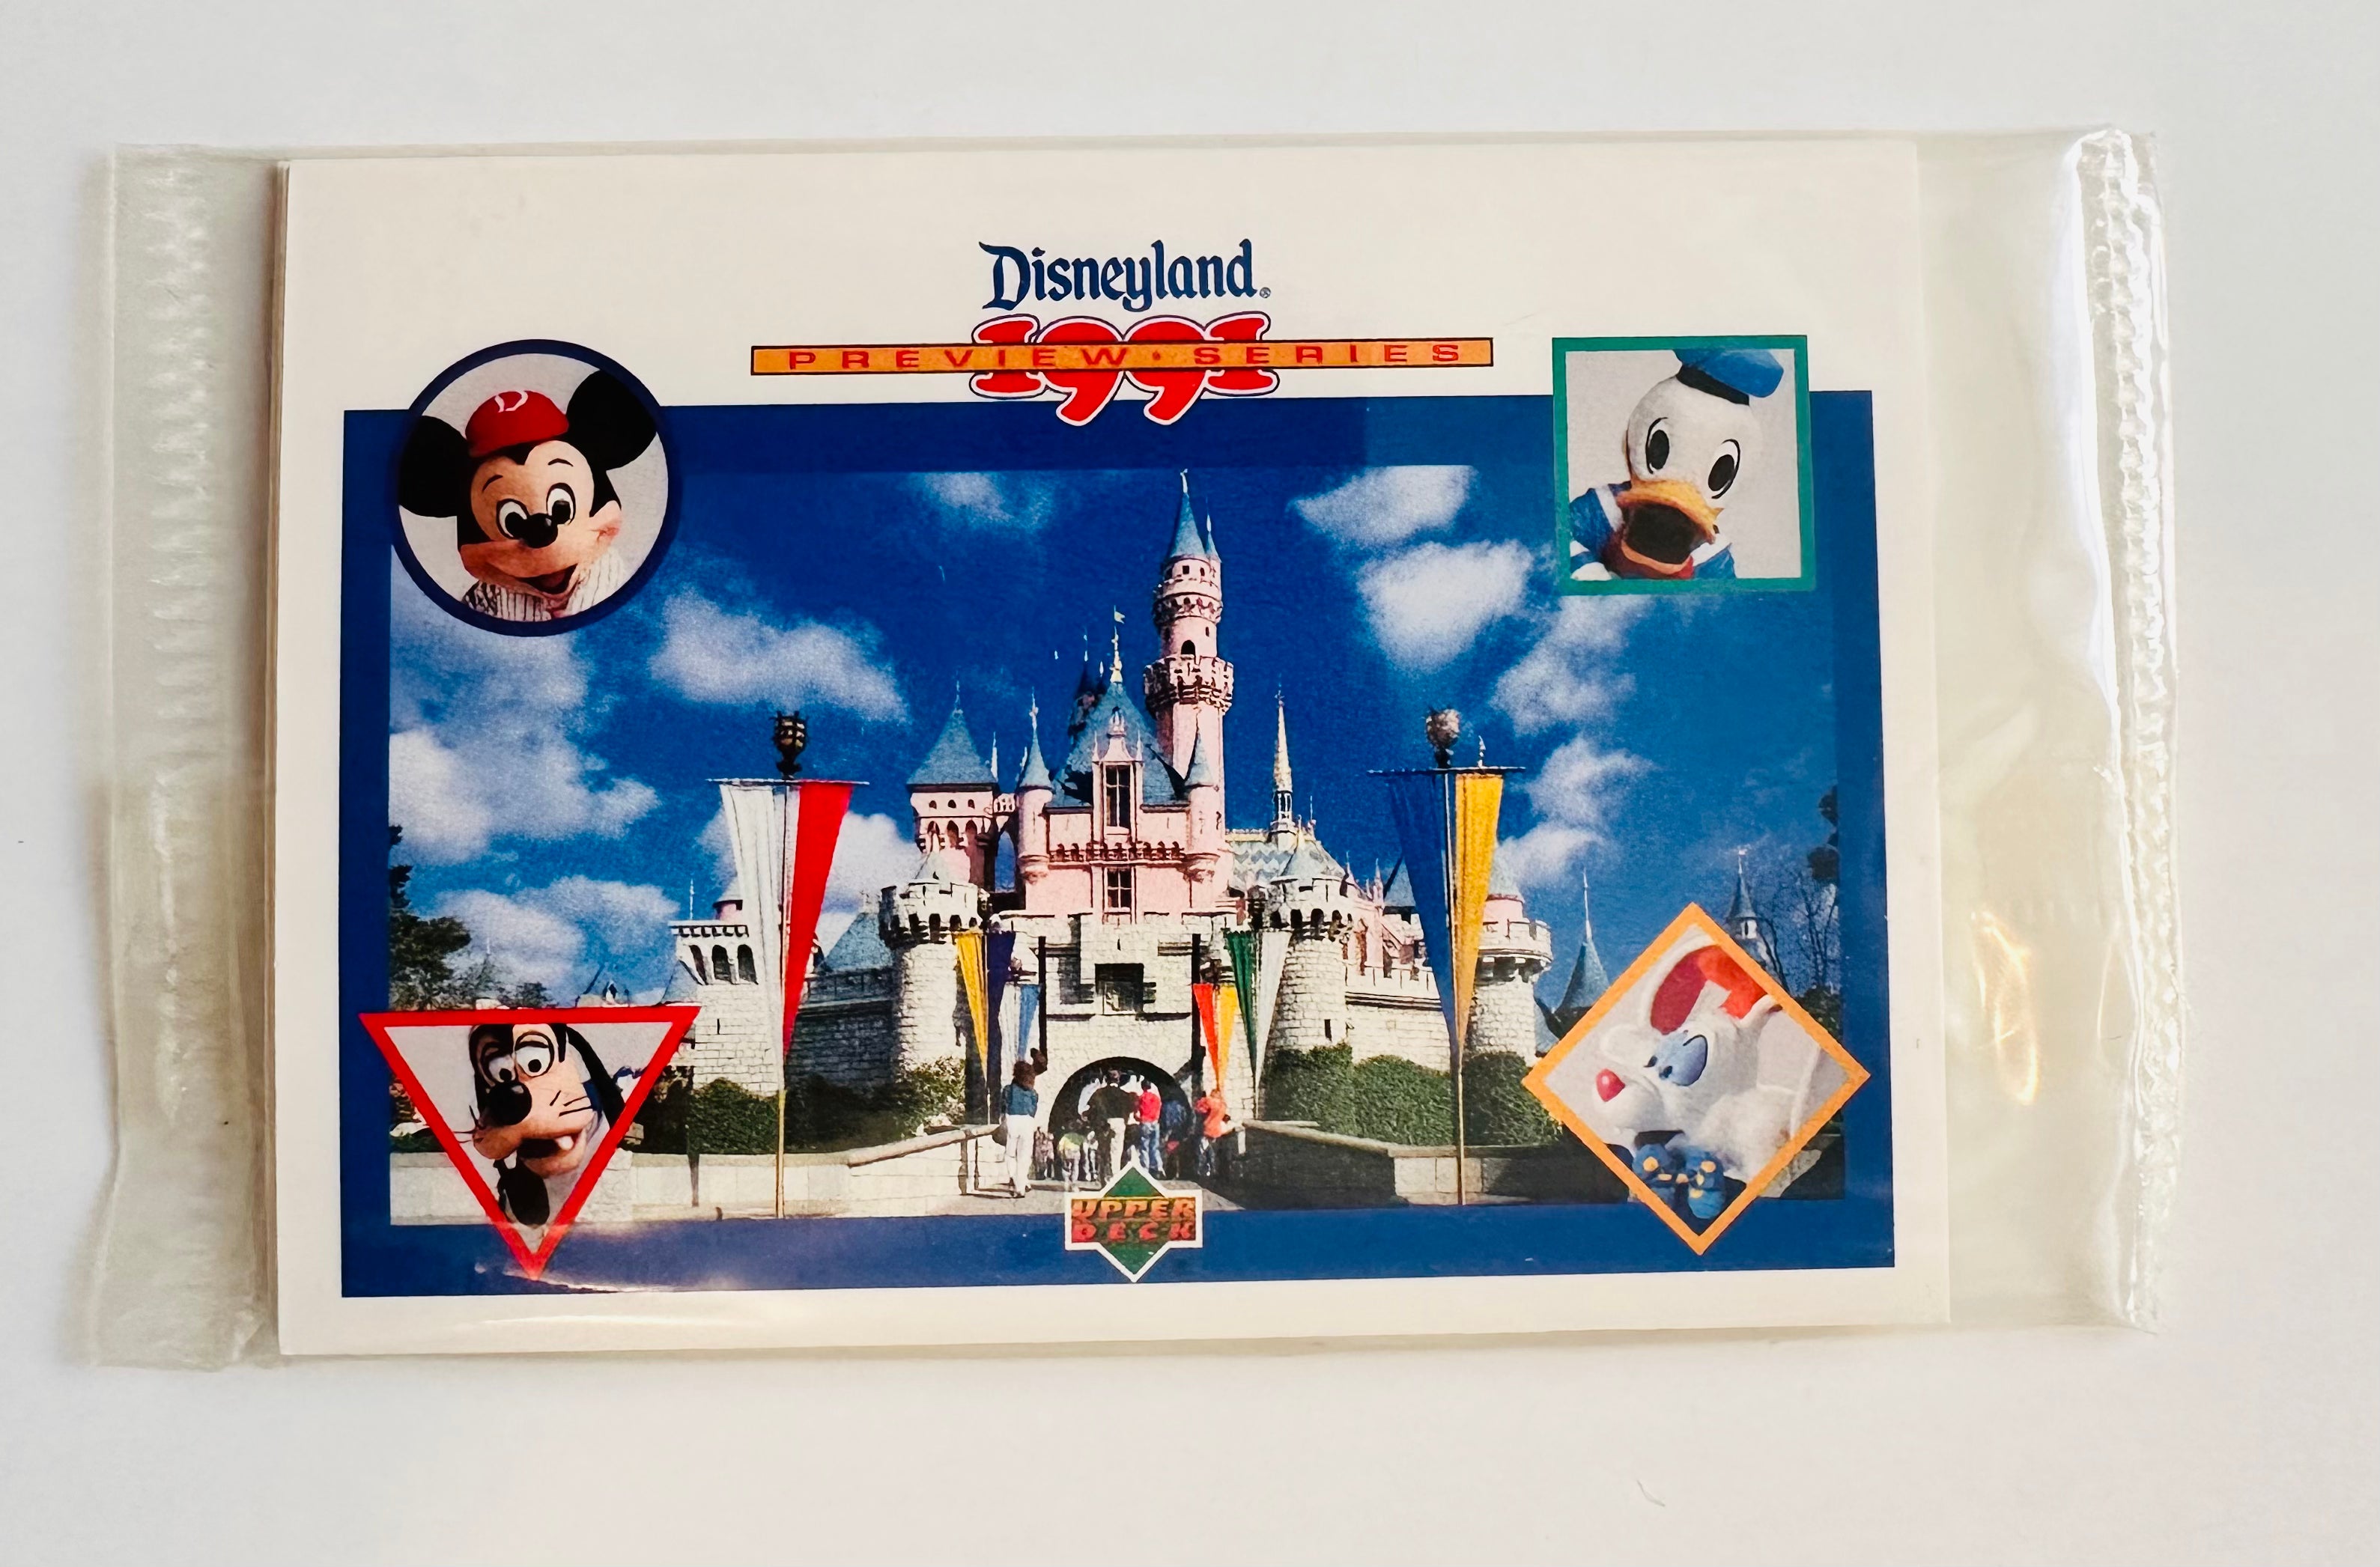 Disneyland rare full unused vintage ticket with Factory Sealed upper deck cards Preview set 1991